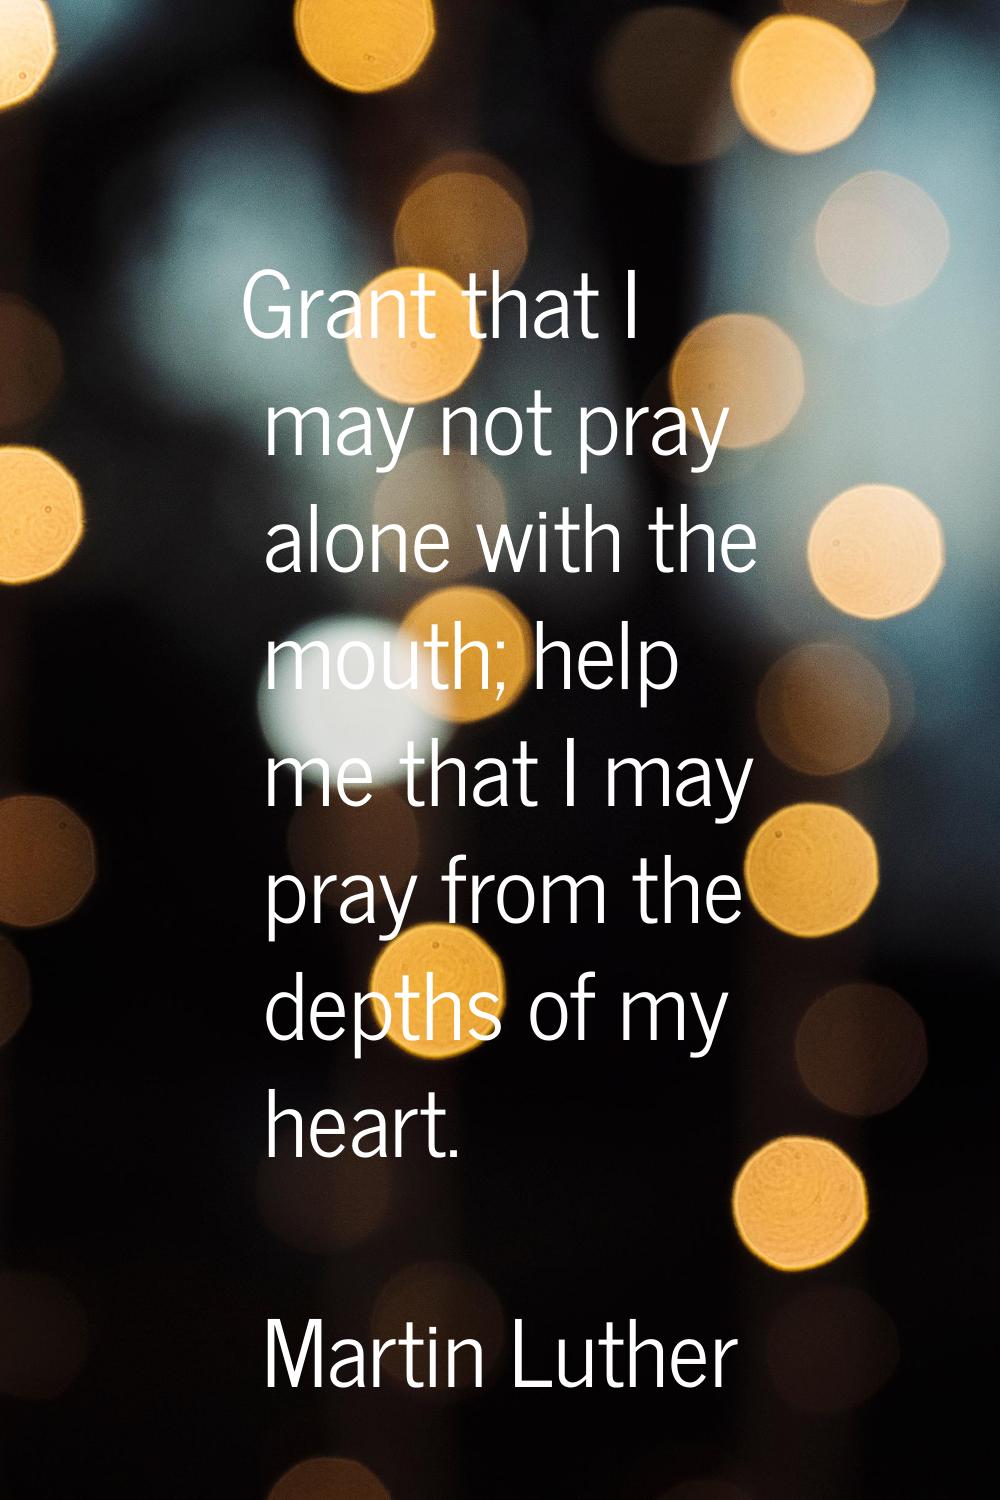 Grant that I may not pray alone with the mouth; help me that I may pray from the depths of my heart